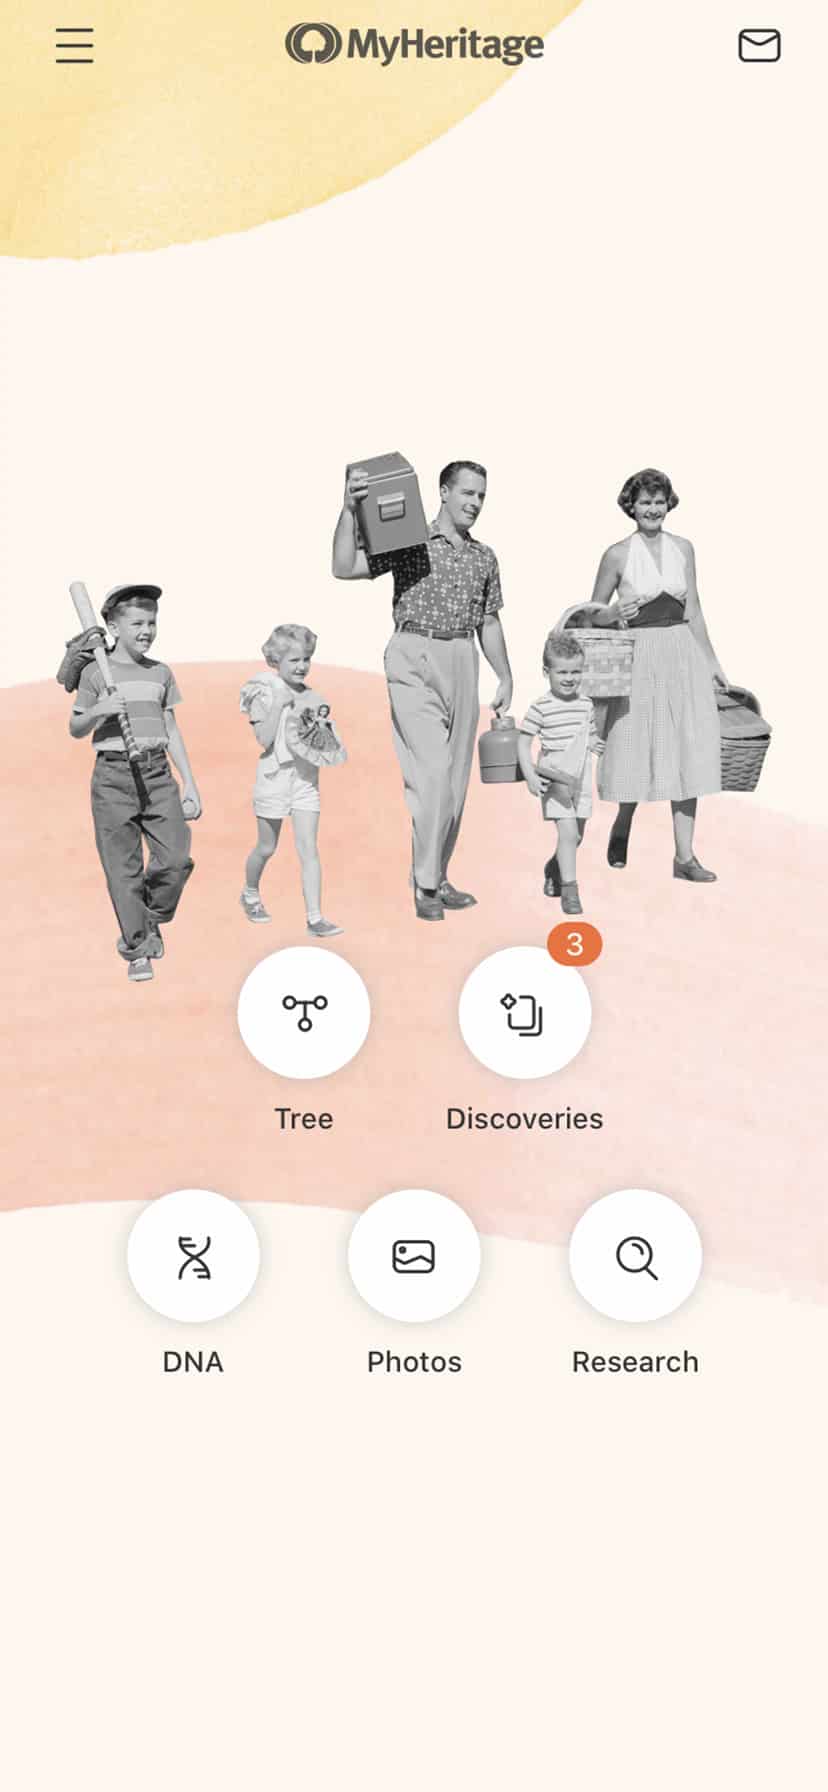 The MyHeritage mobile app home screen